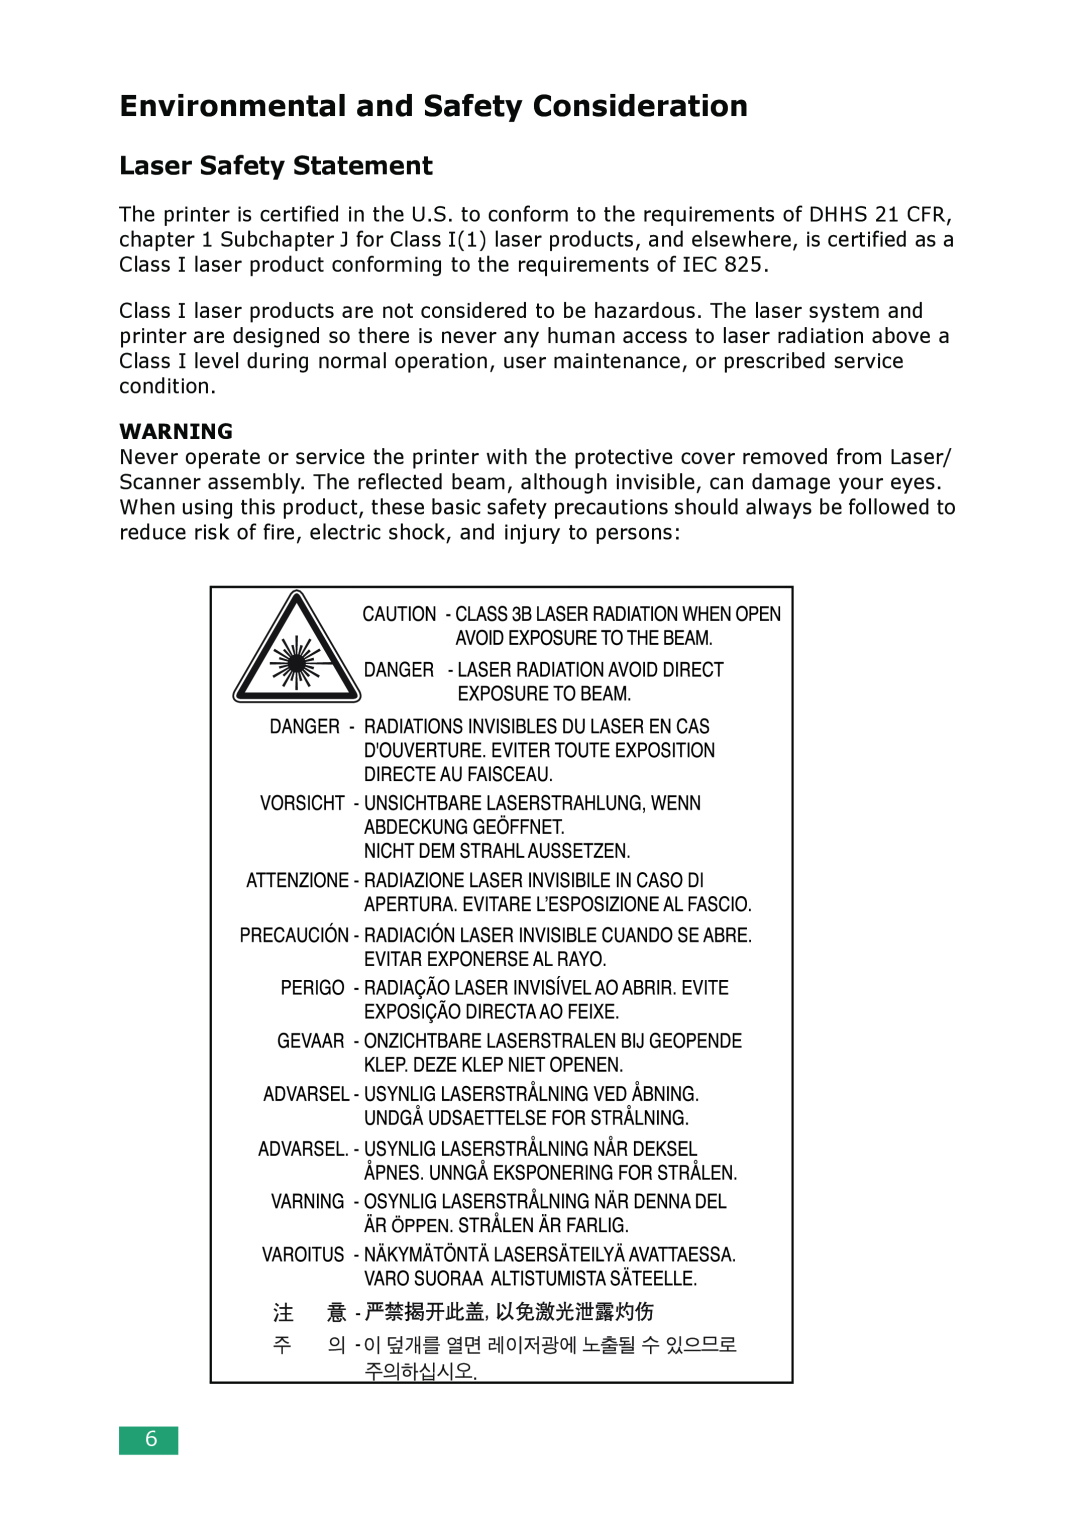 Samsung ML-1610 manual Environmental and Safety Consideration, Laser Safety Statement 